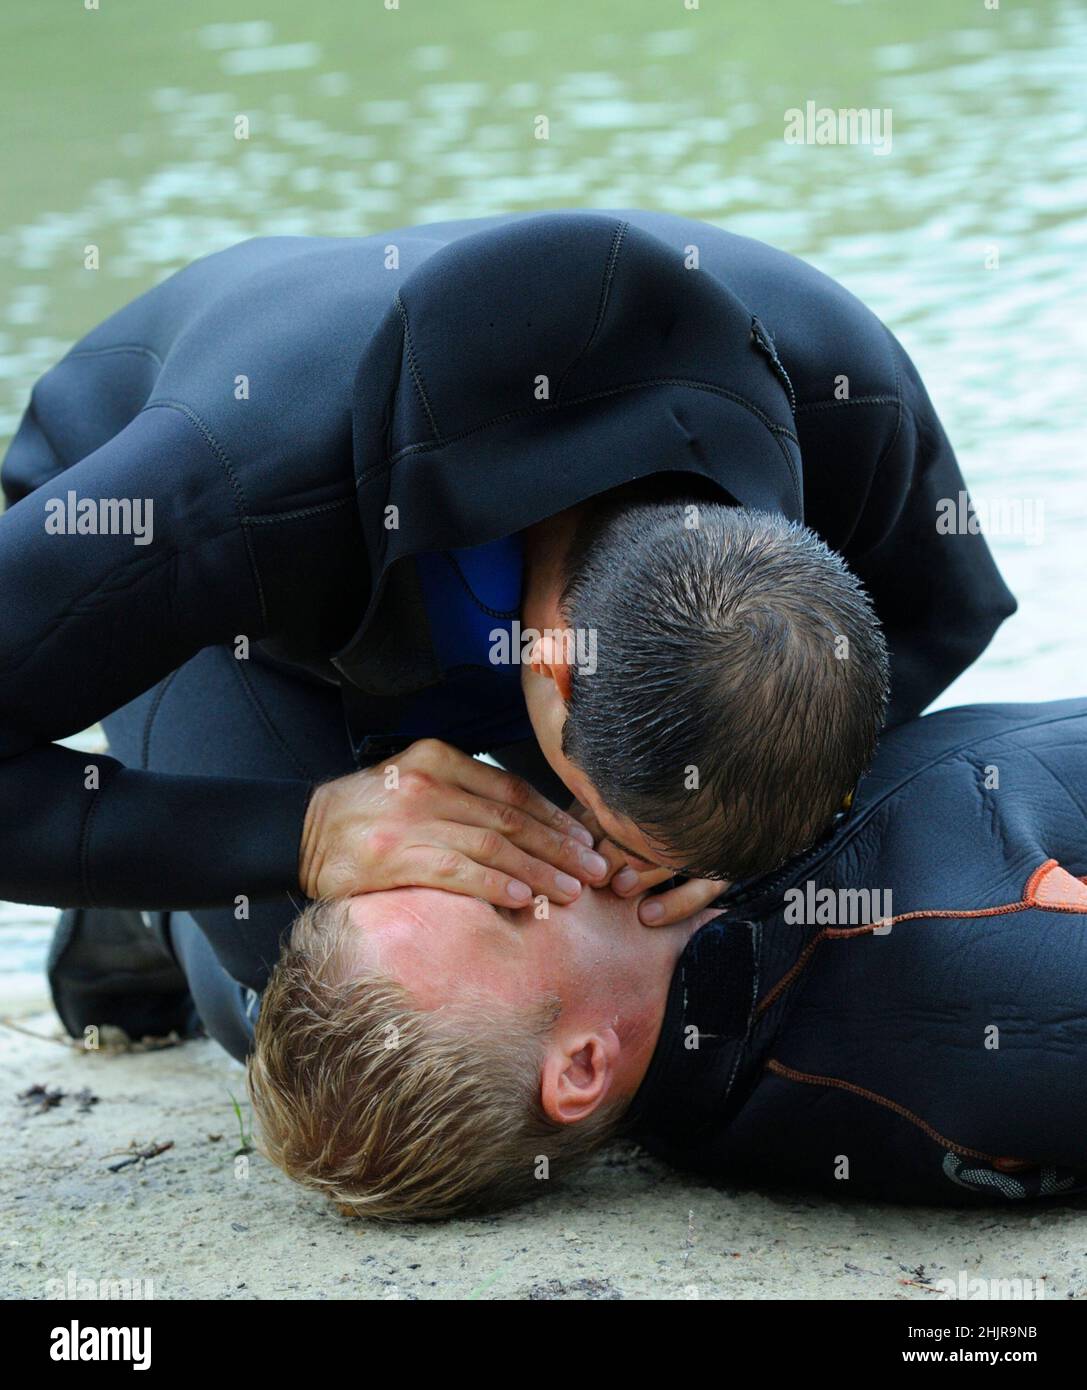 Artificial respiration. Lifeguard giving drowning mouth-to-mouth resuscitation. Stock Photo